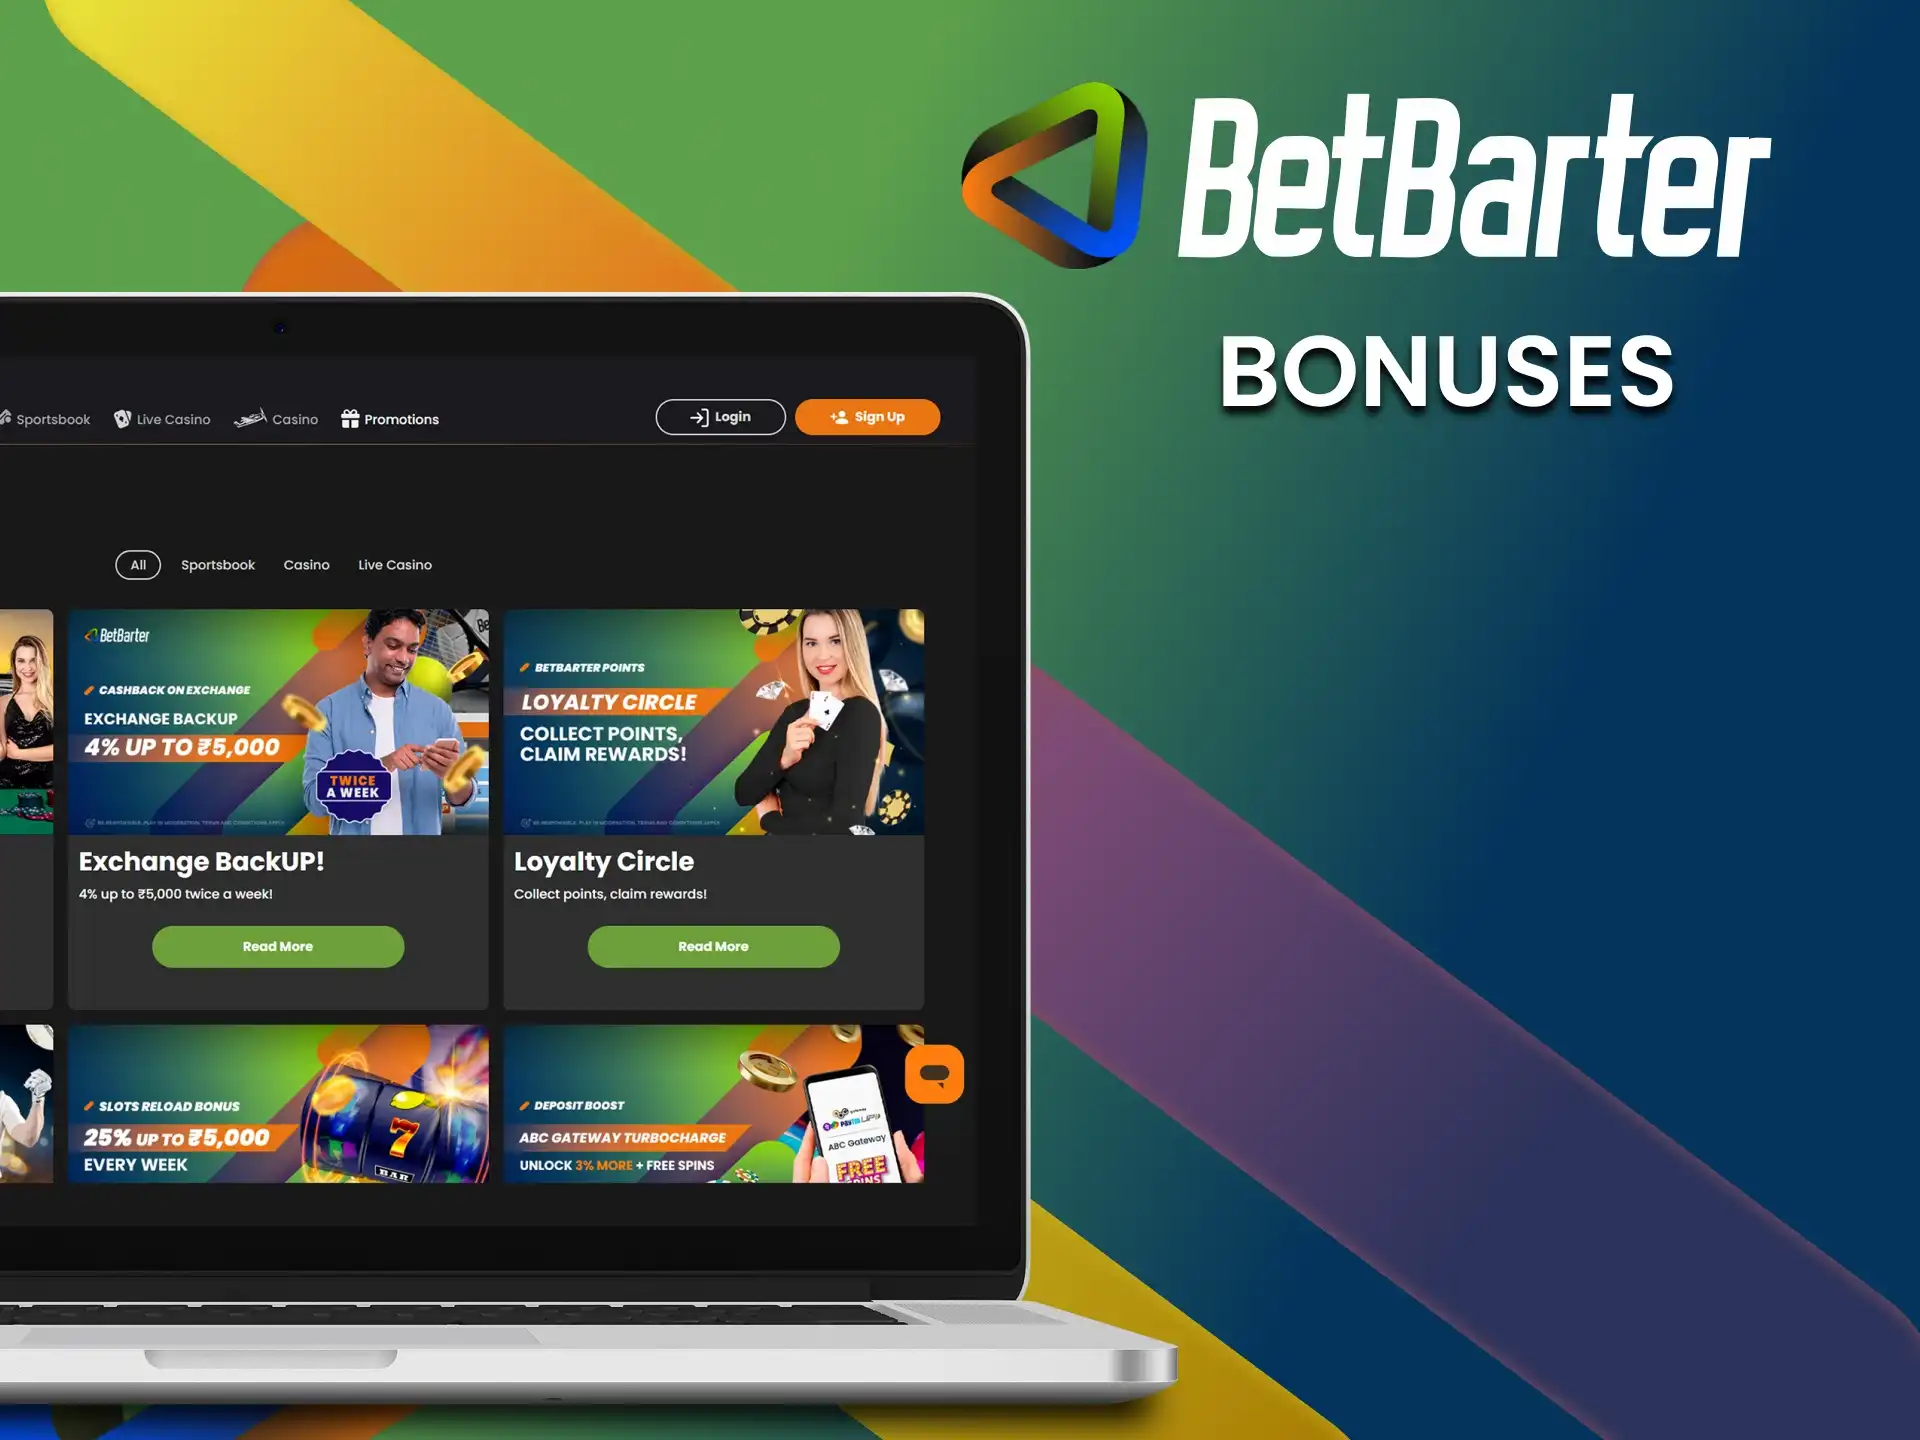 Receive special offers from BetBarter sportsbook online, which will give you a new and pleasant interaction experience.